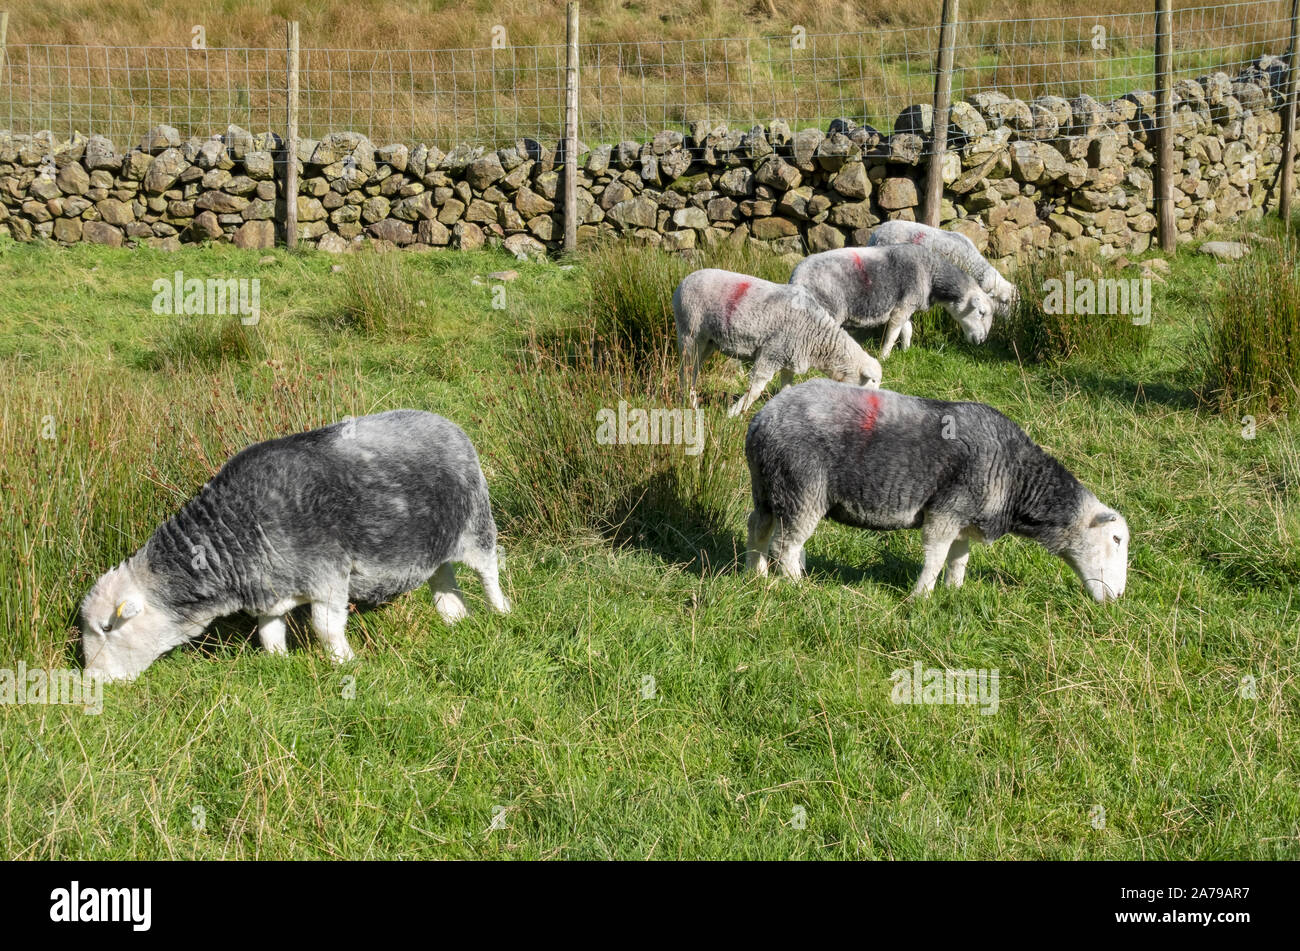 Herdwick sheep grazing in pasture near Buttermere in summer Lake District National Park Cumbria England UK United Kingdom GB Great Britain Stock Photo